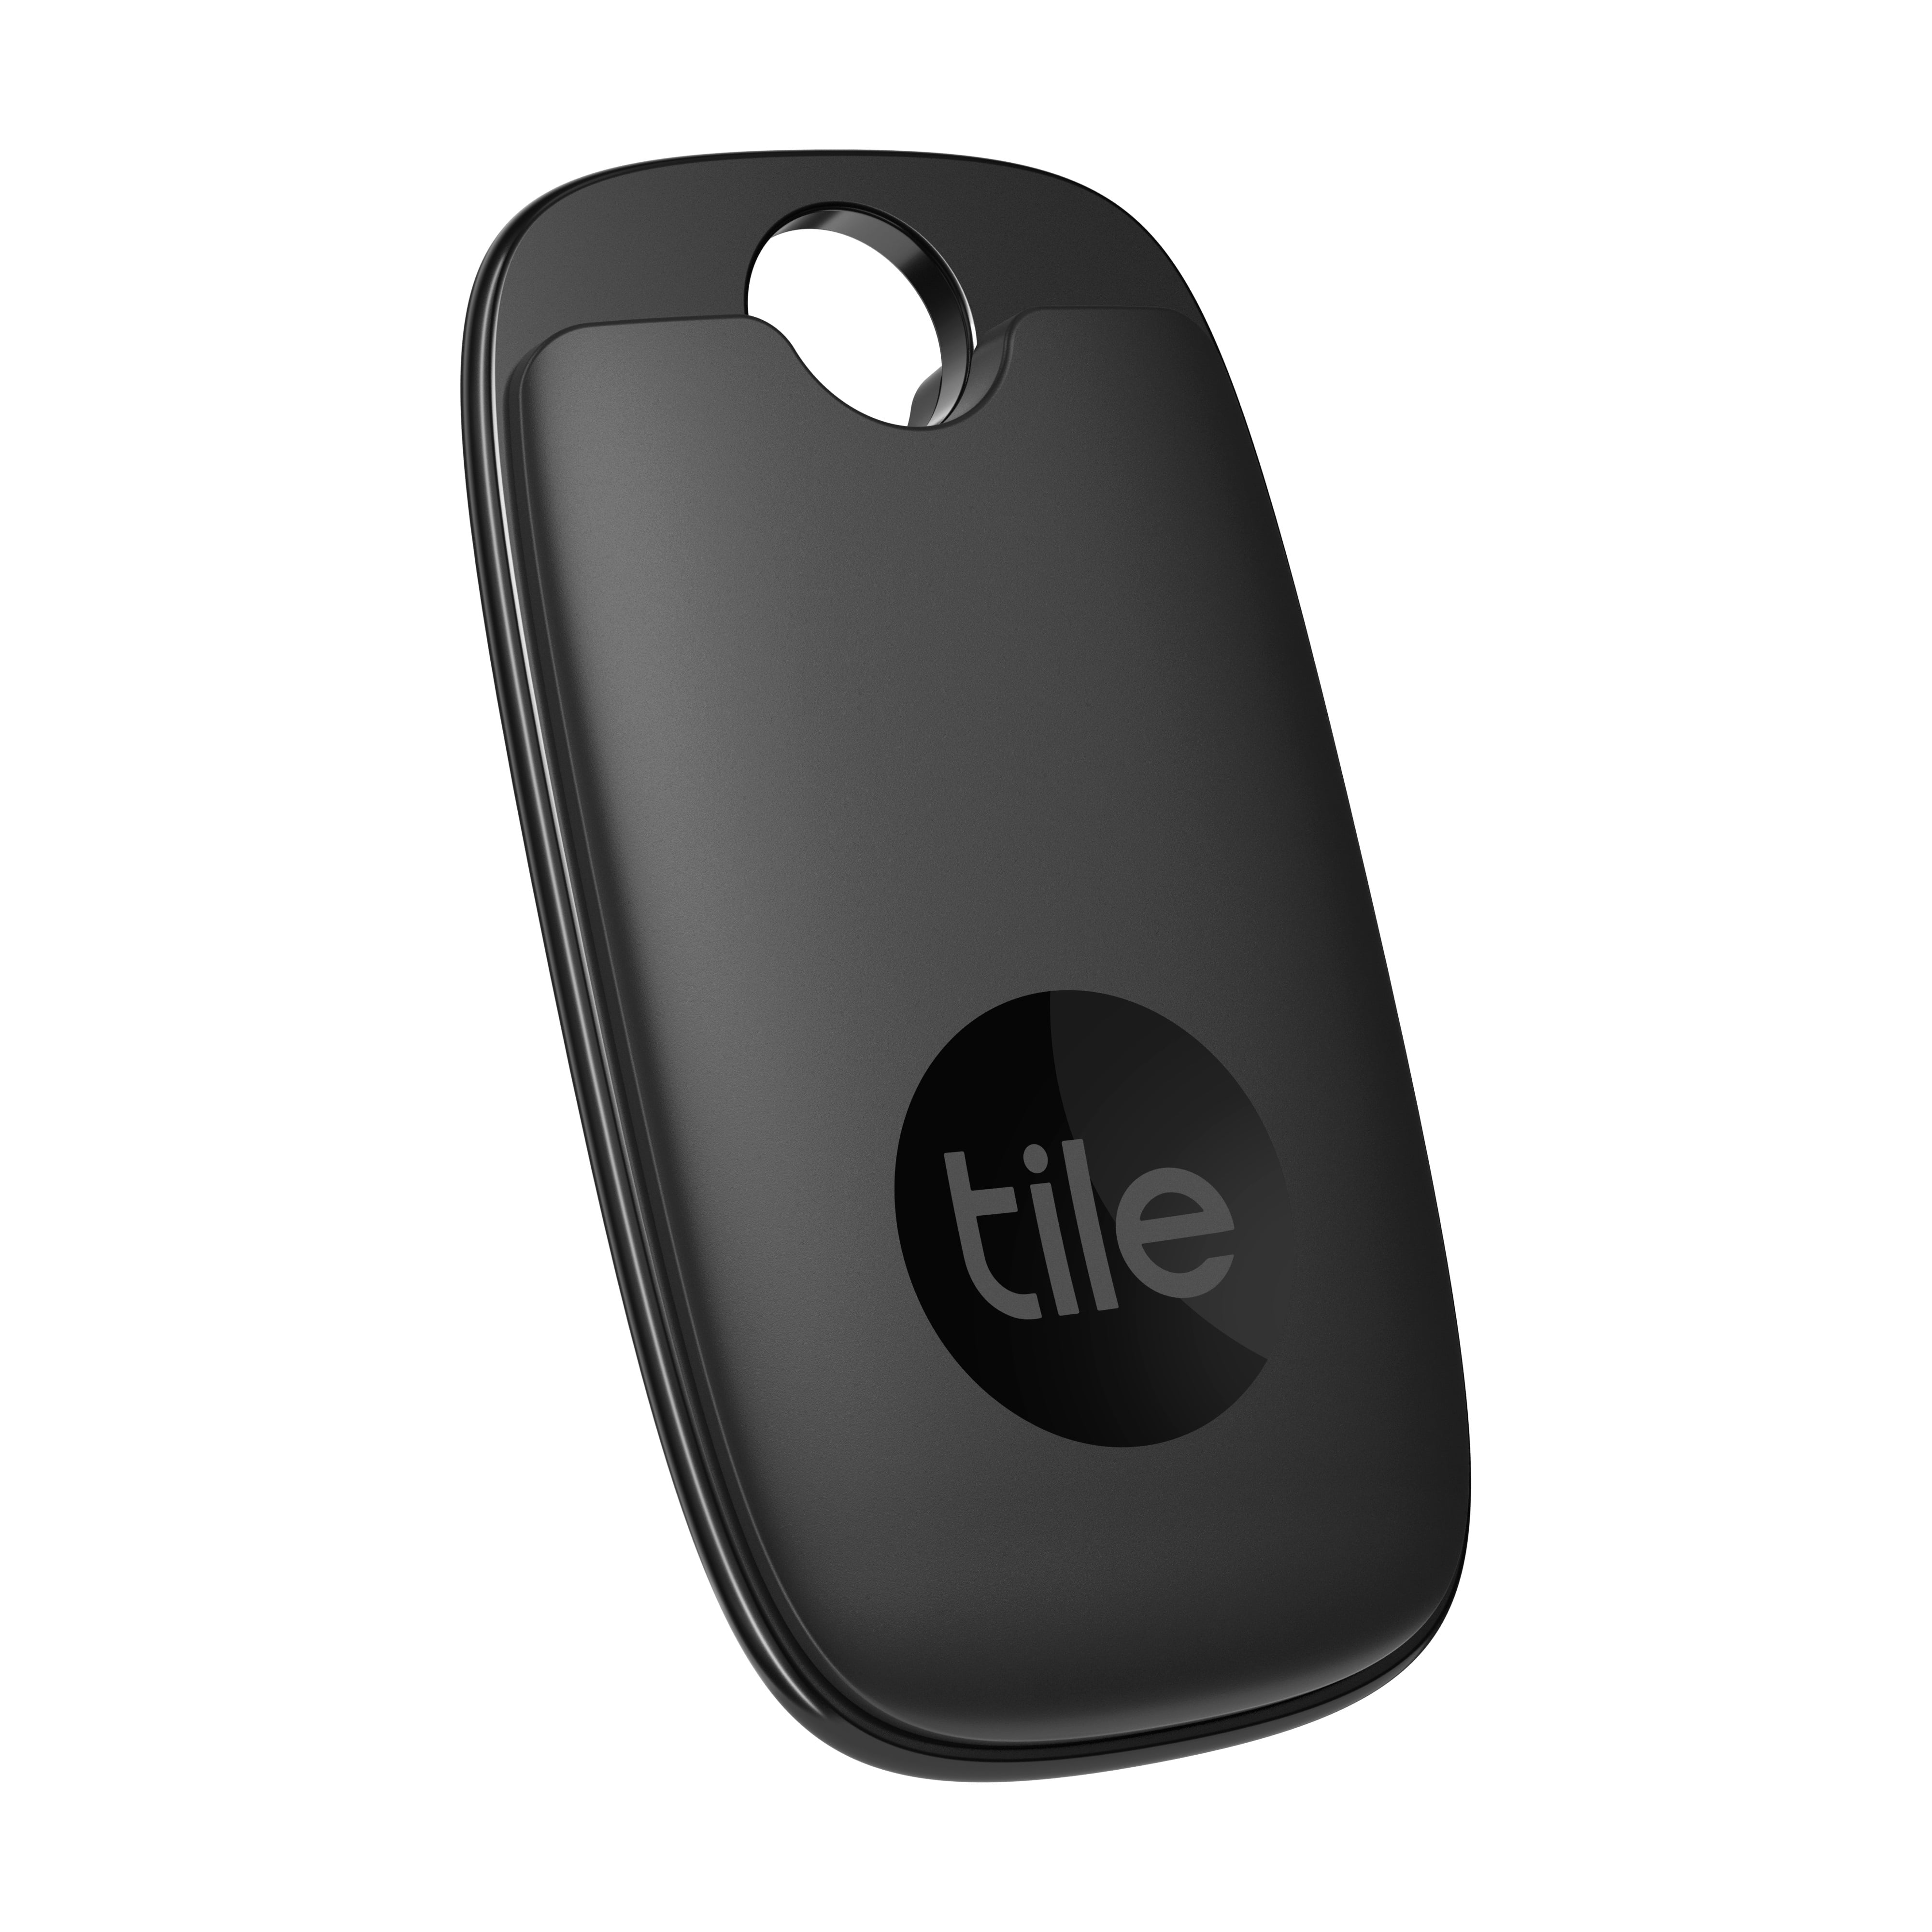 Tile Pro Series Smart Tracker Key Sport/Graphite or Style/White Phone Finder 